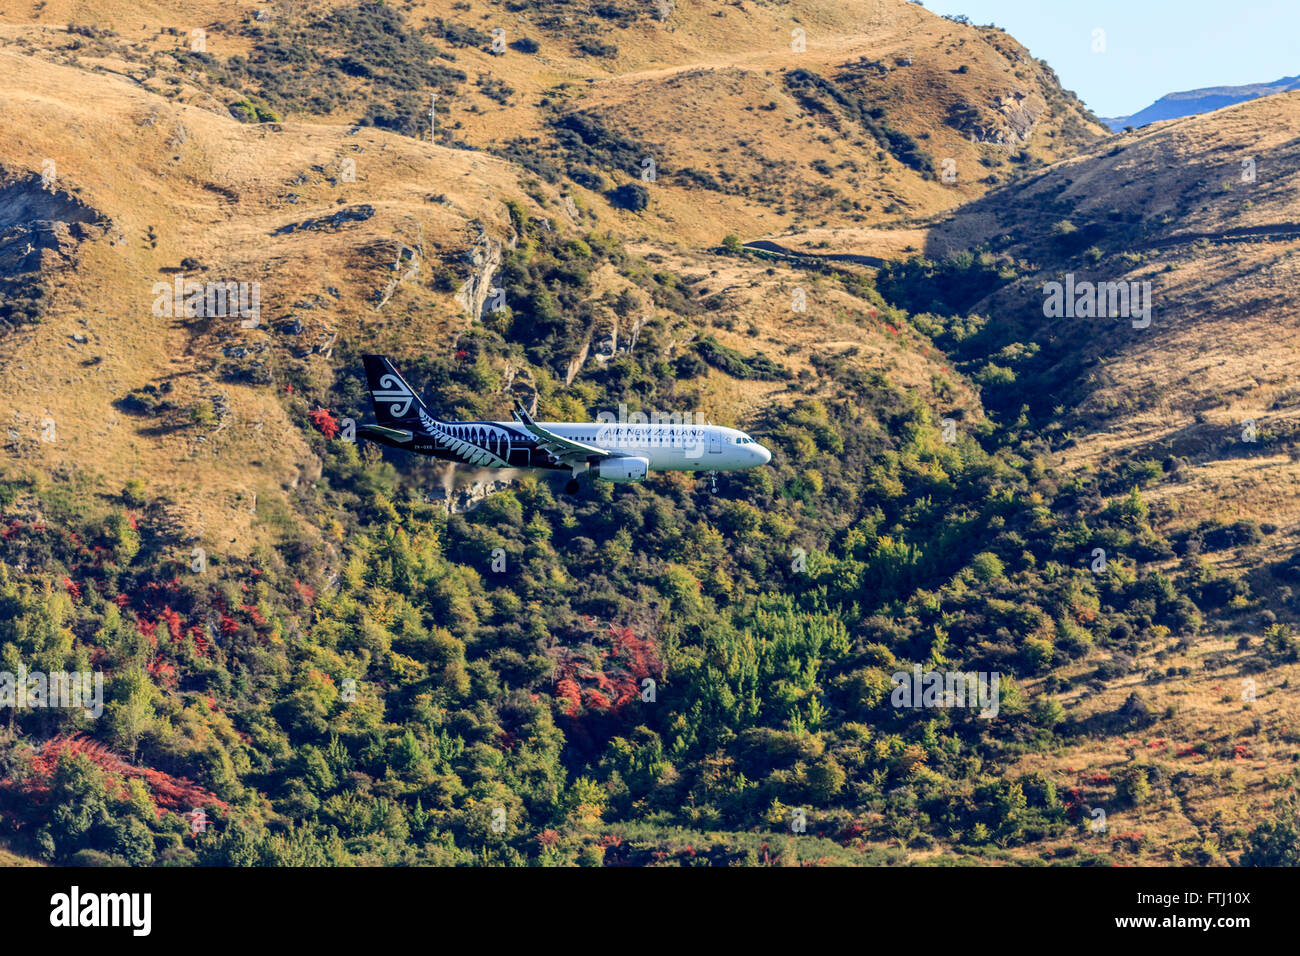 Air New Zealand airbus A320 twin jet,landing at ZQN airport,Queenstown,Central Otago,South Island,New Zealand Stock Photo